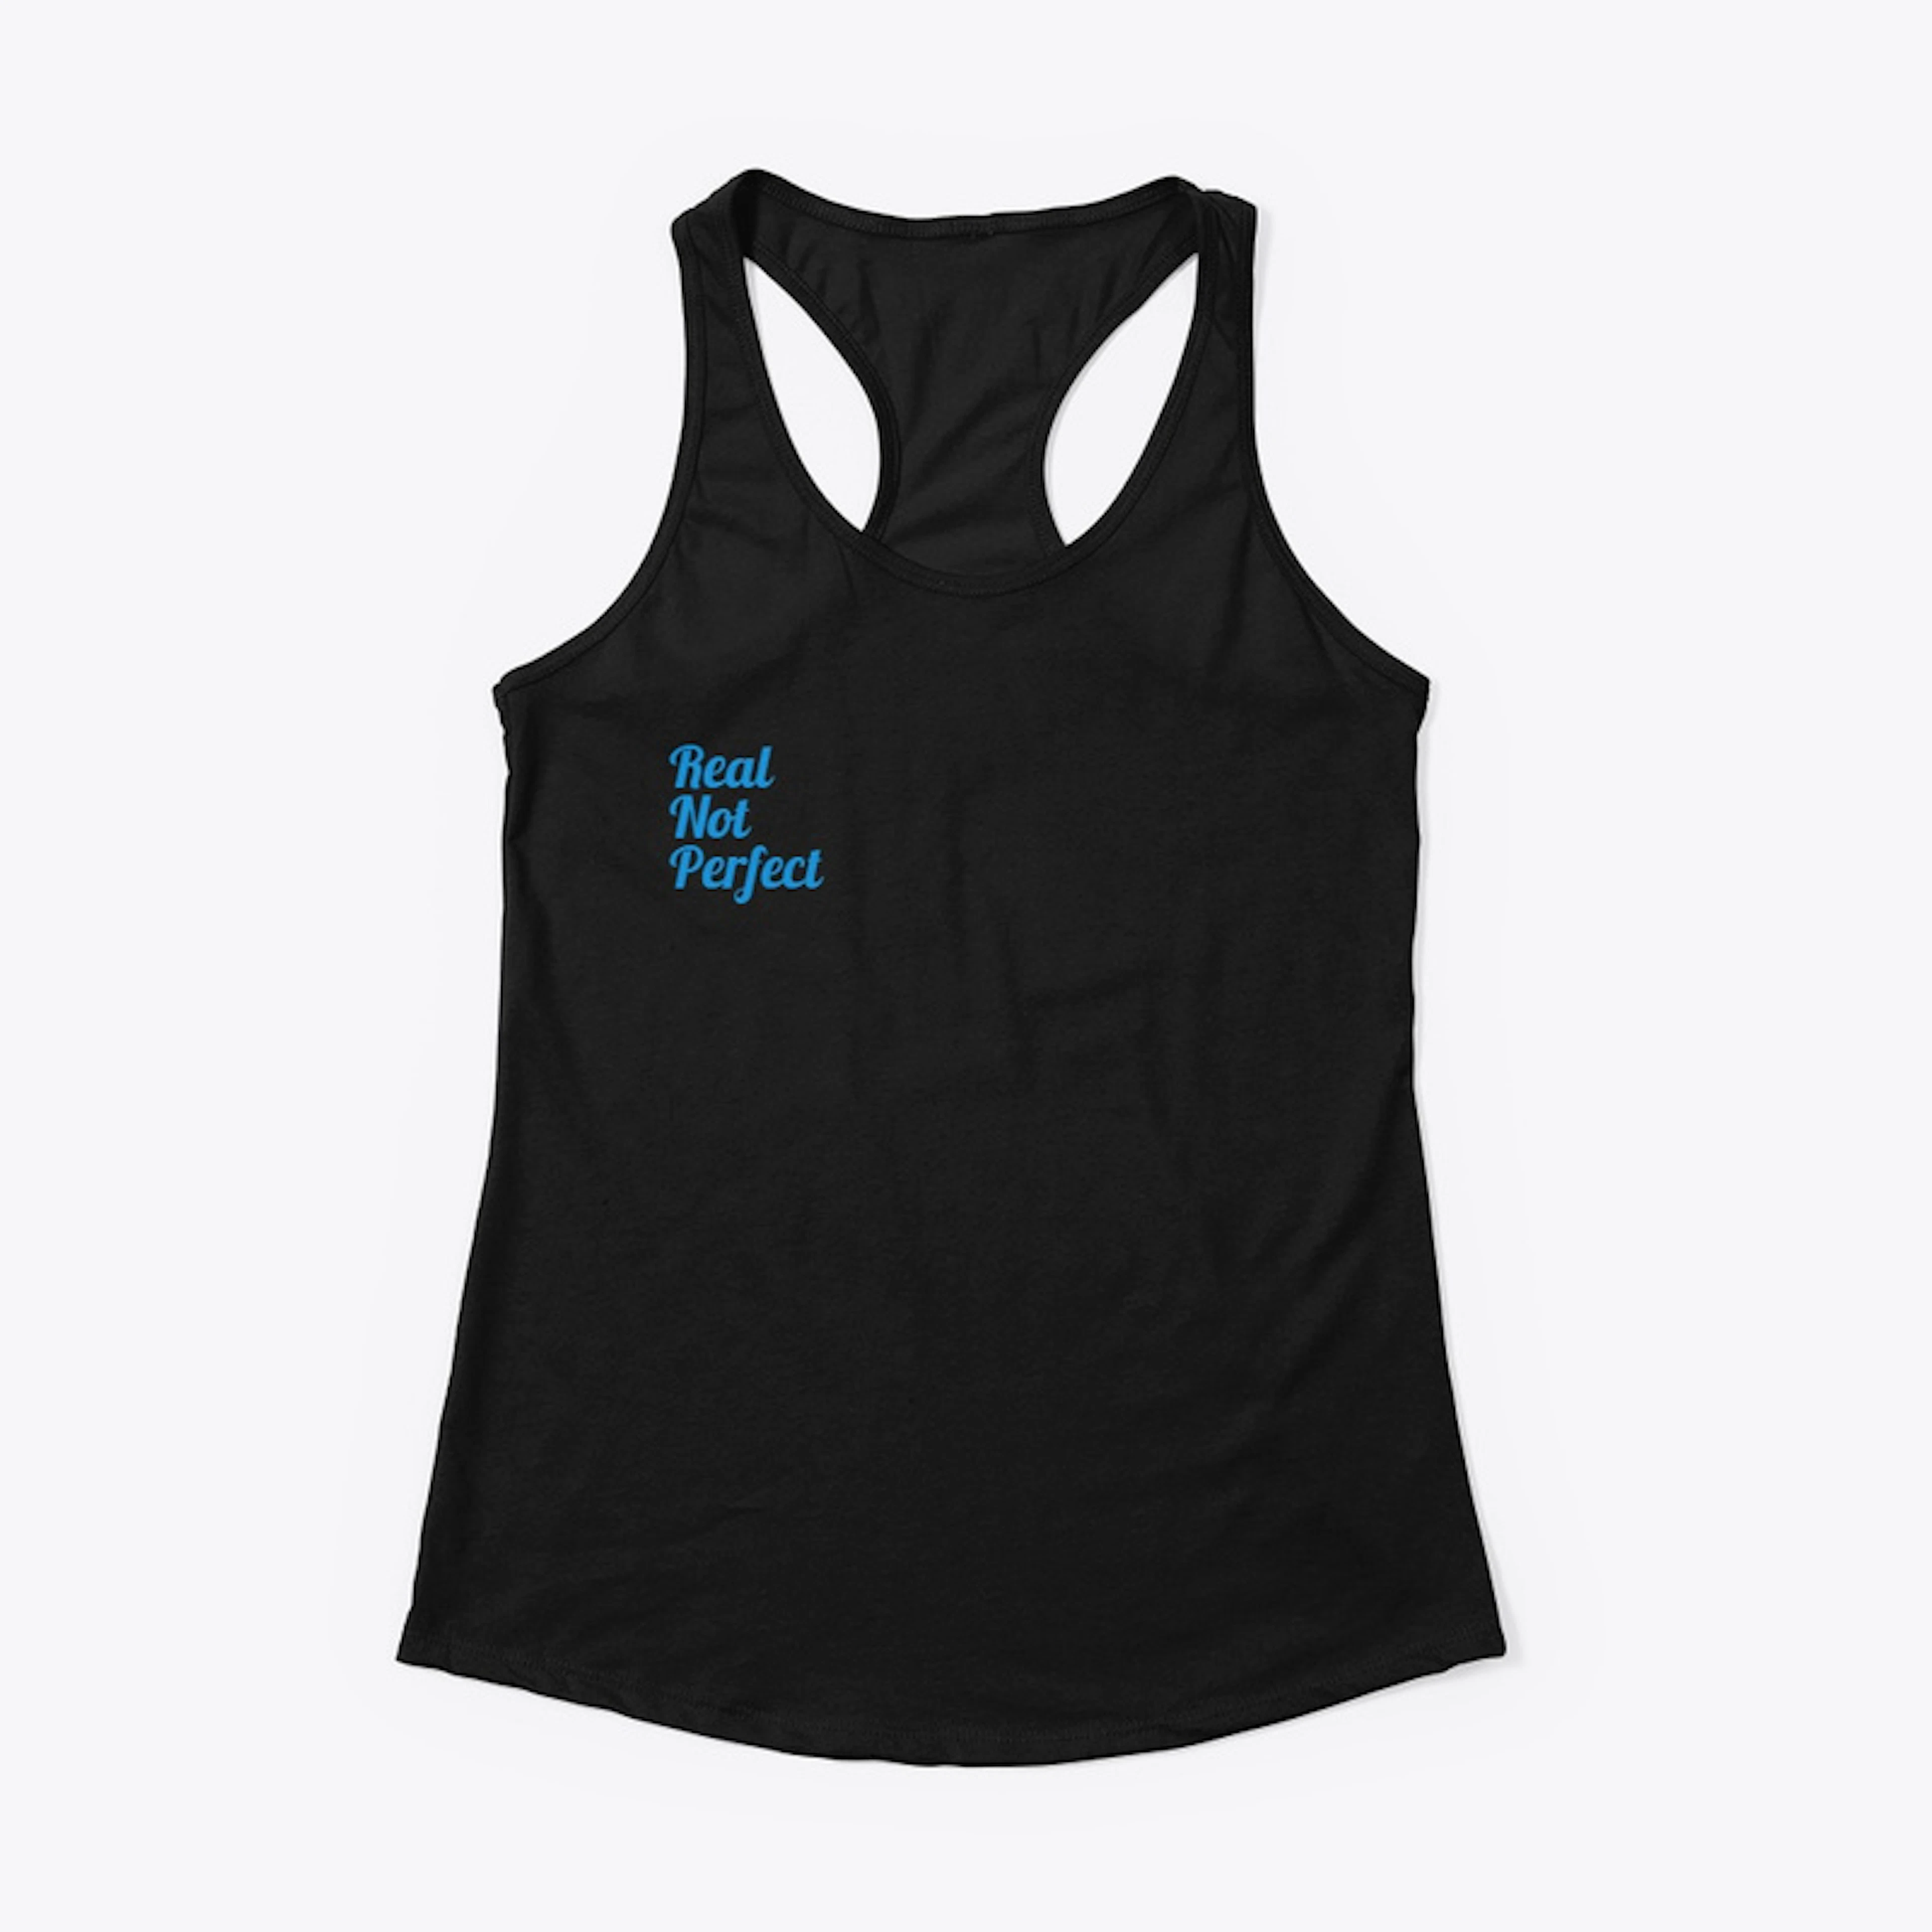 Real Not Perfect Womens Tank